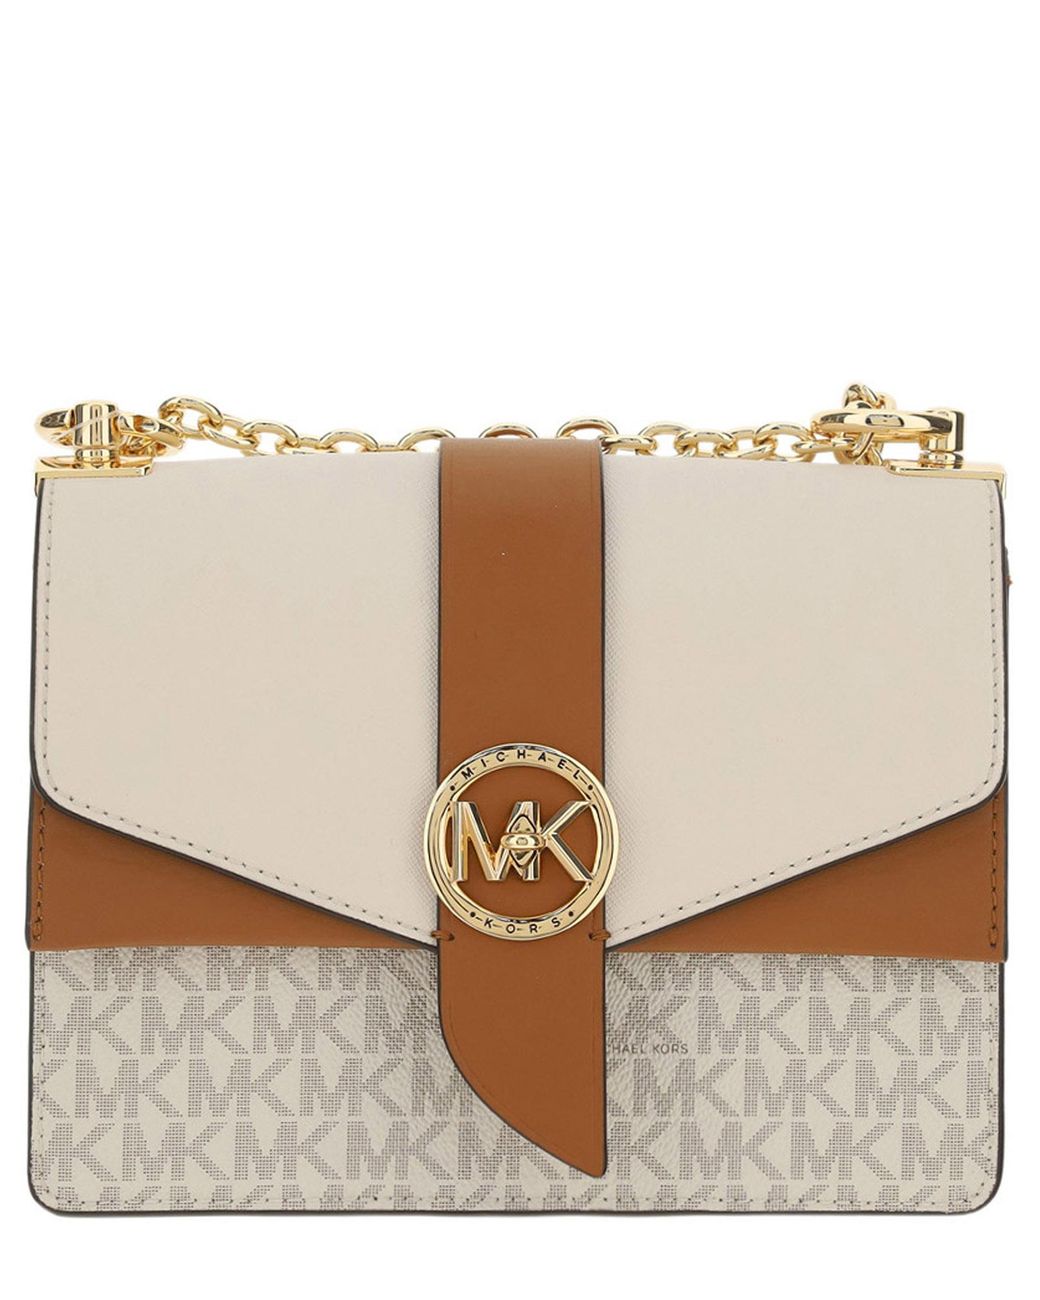 Michael Kors Greenwich Small Shoulder Bag in Natural | Lyst